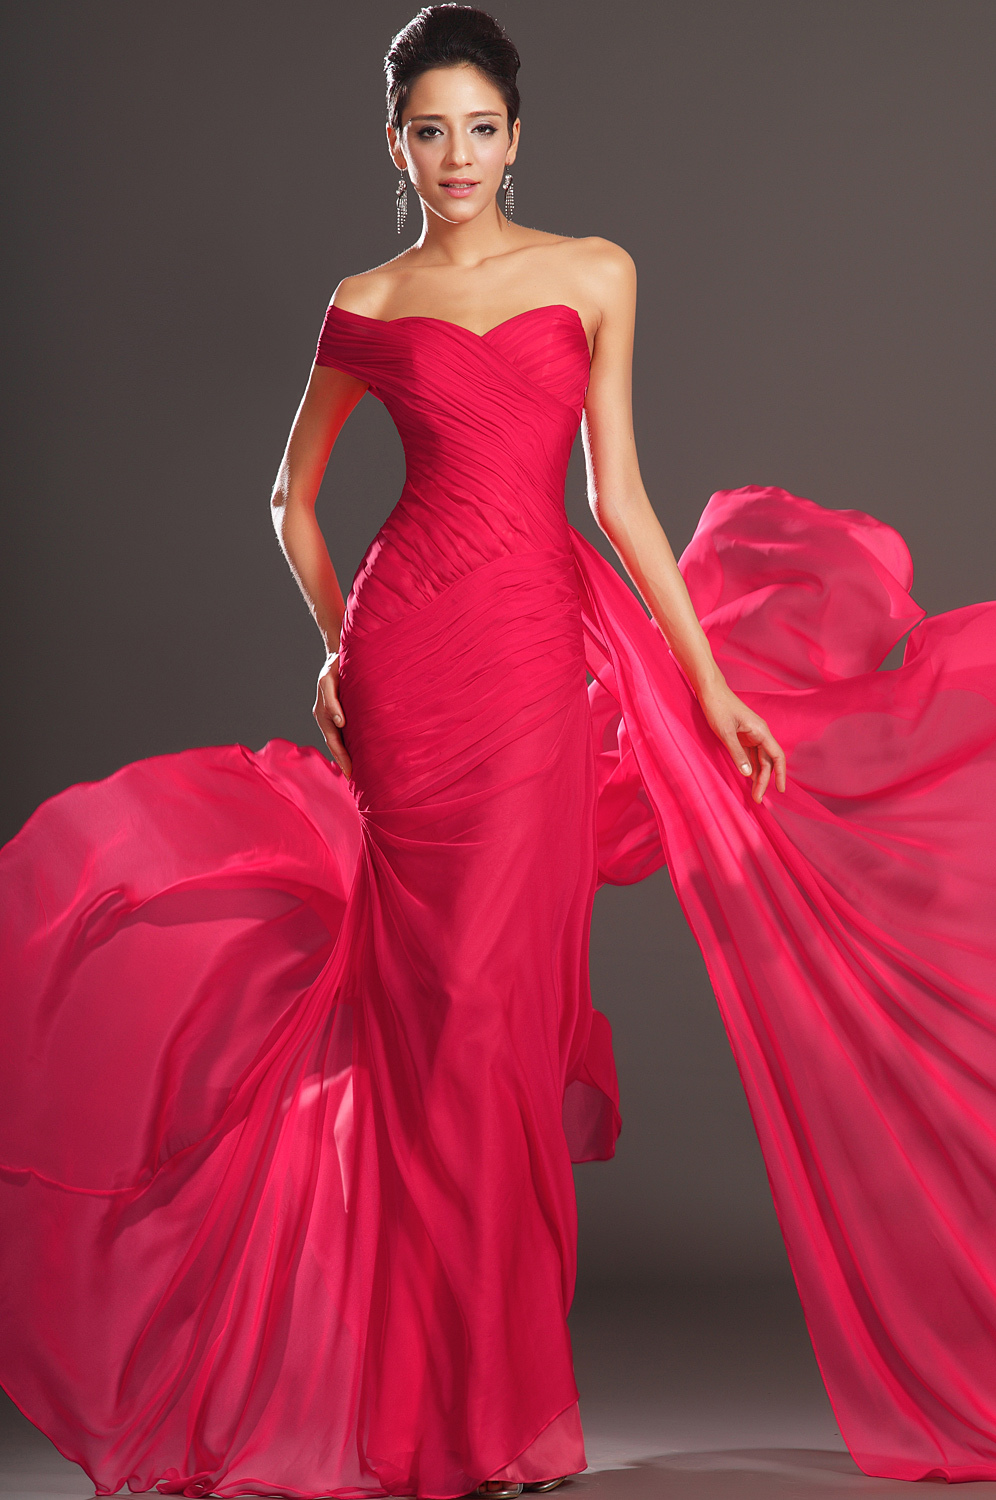 Prom Dresses Rochester Ny - Cocktail Dresses 2016